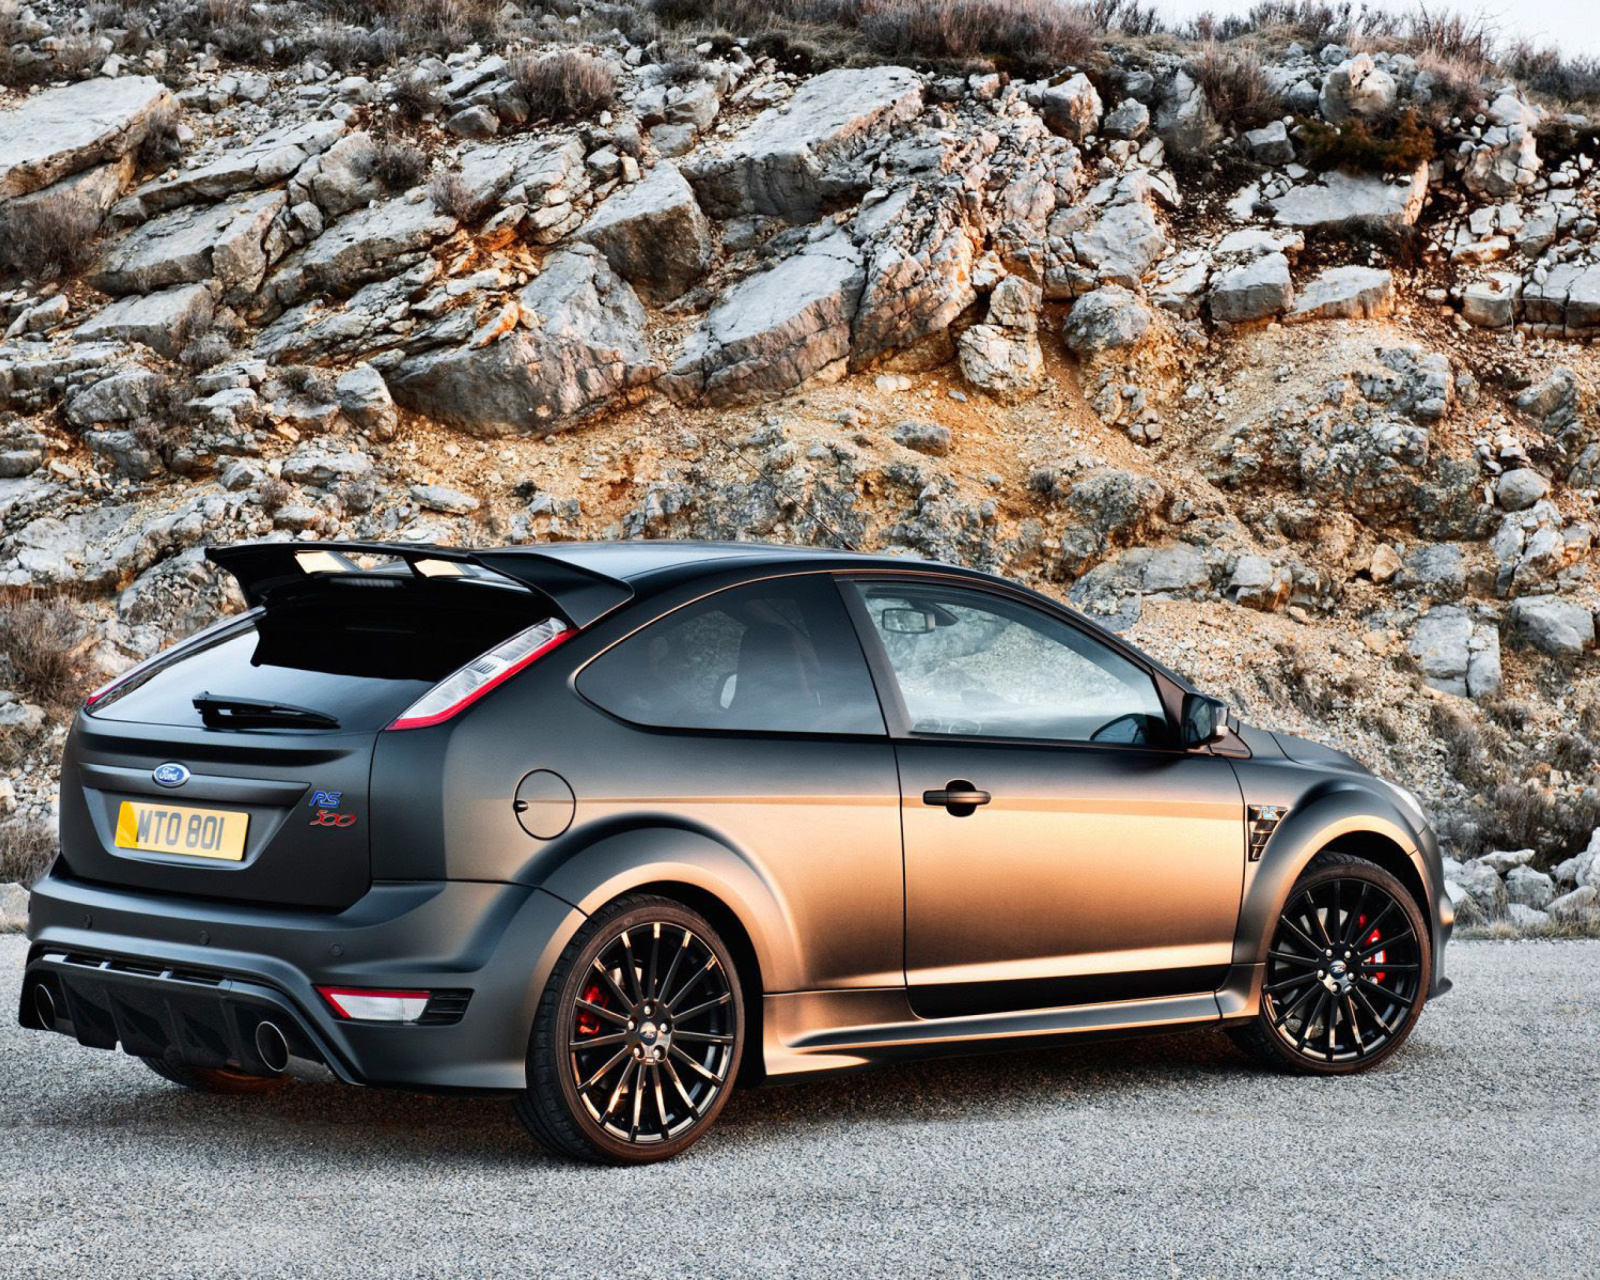 Ford Focus RS500 wallpaper 1600x1280